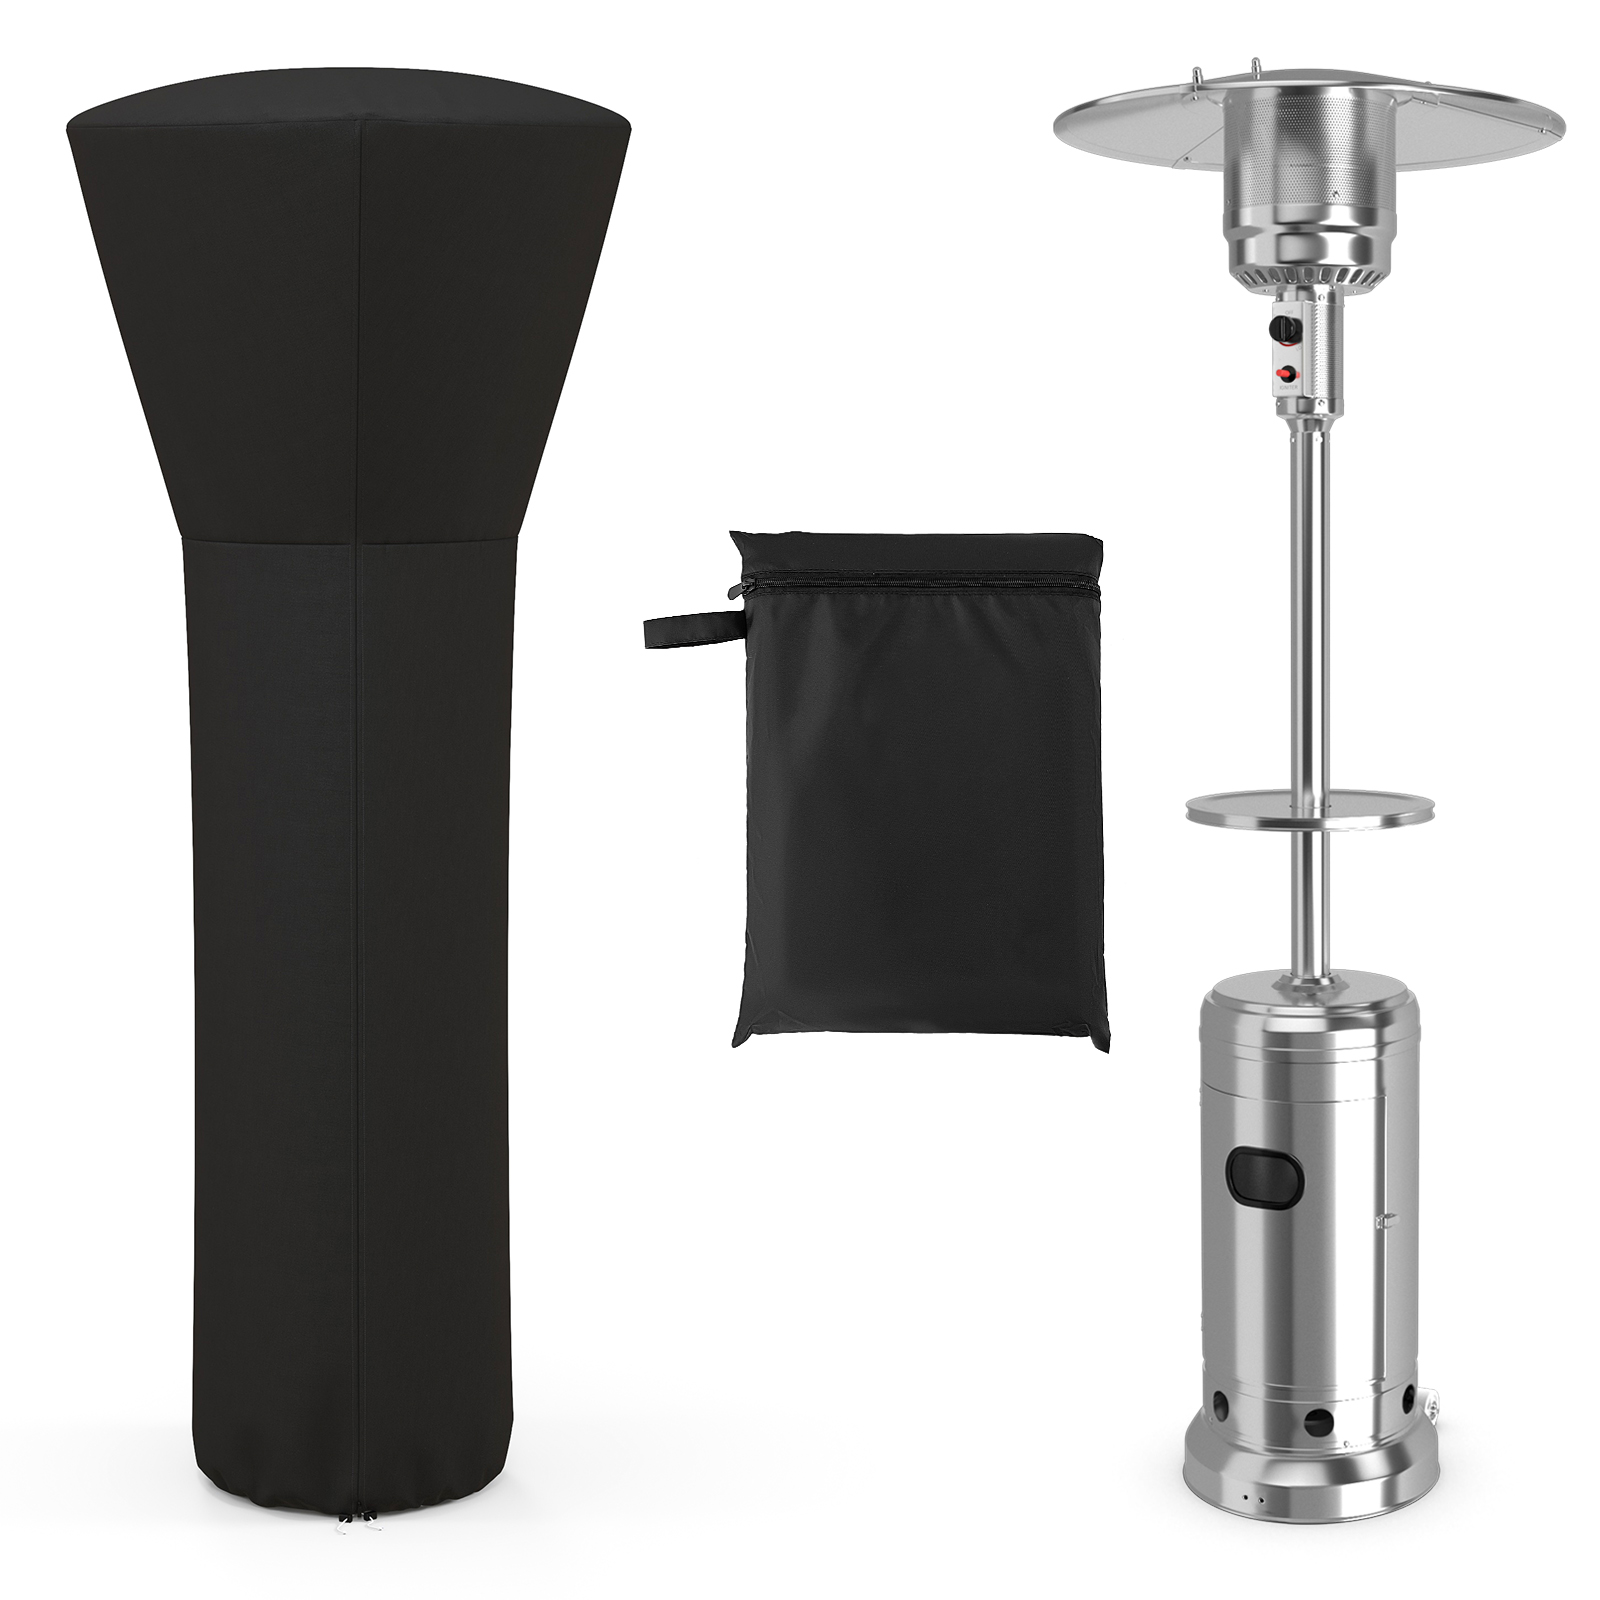 Patio_Heater_Cover_with_Zipper_and_Storage_Bag_Black-3.jpg